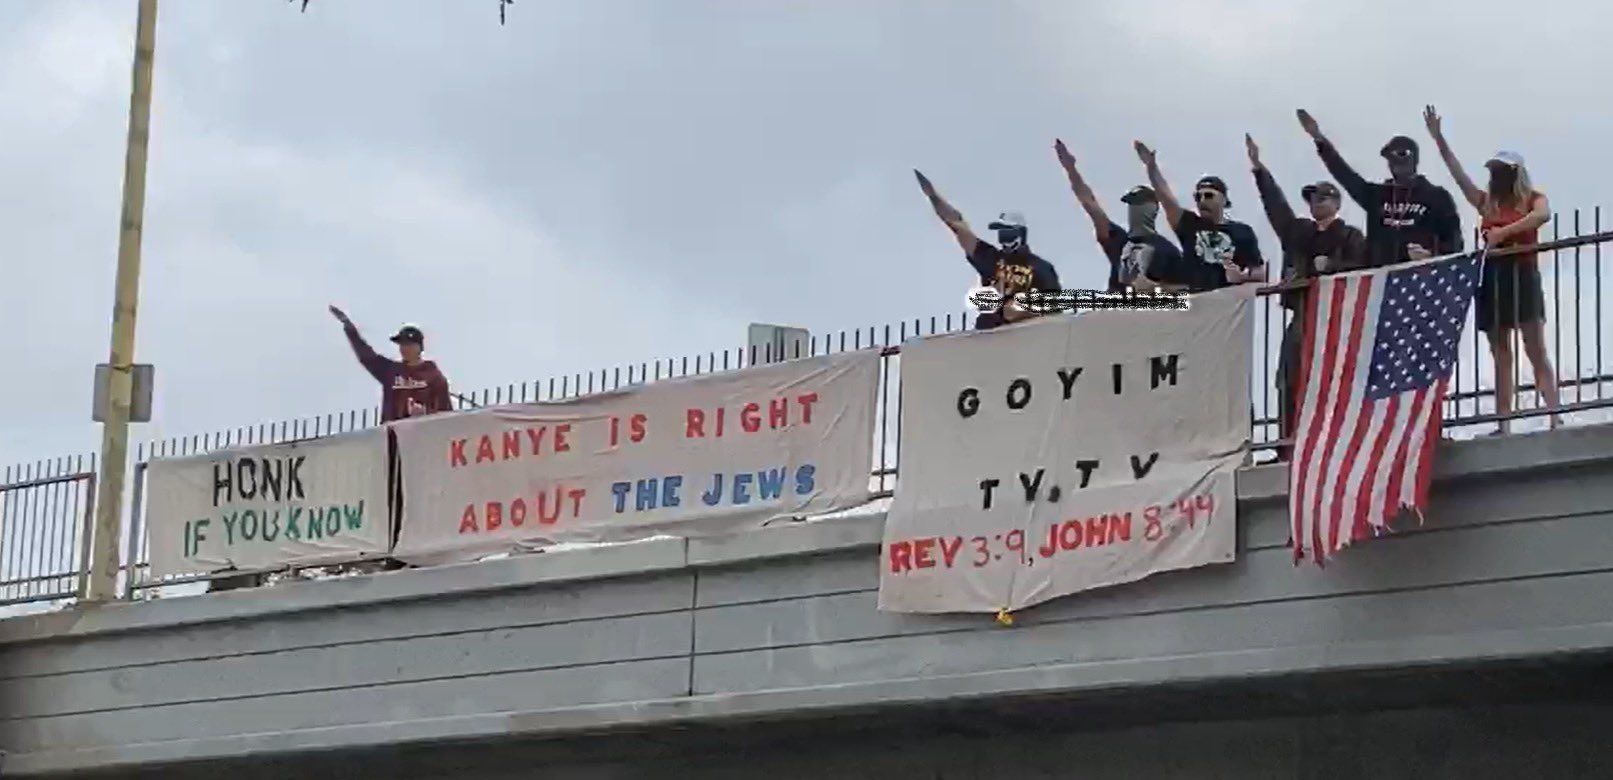 Antisemites hang banner over LA freeway declaring Kanye 'right about the  Jews